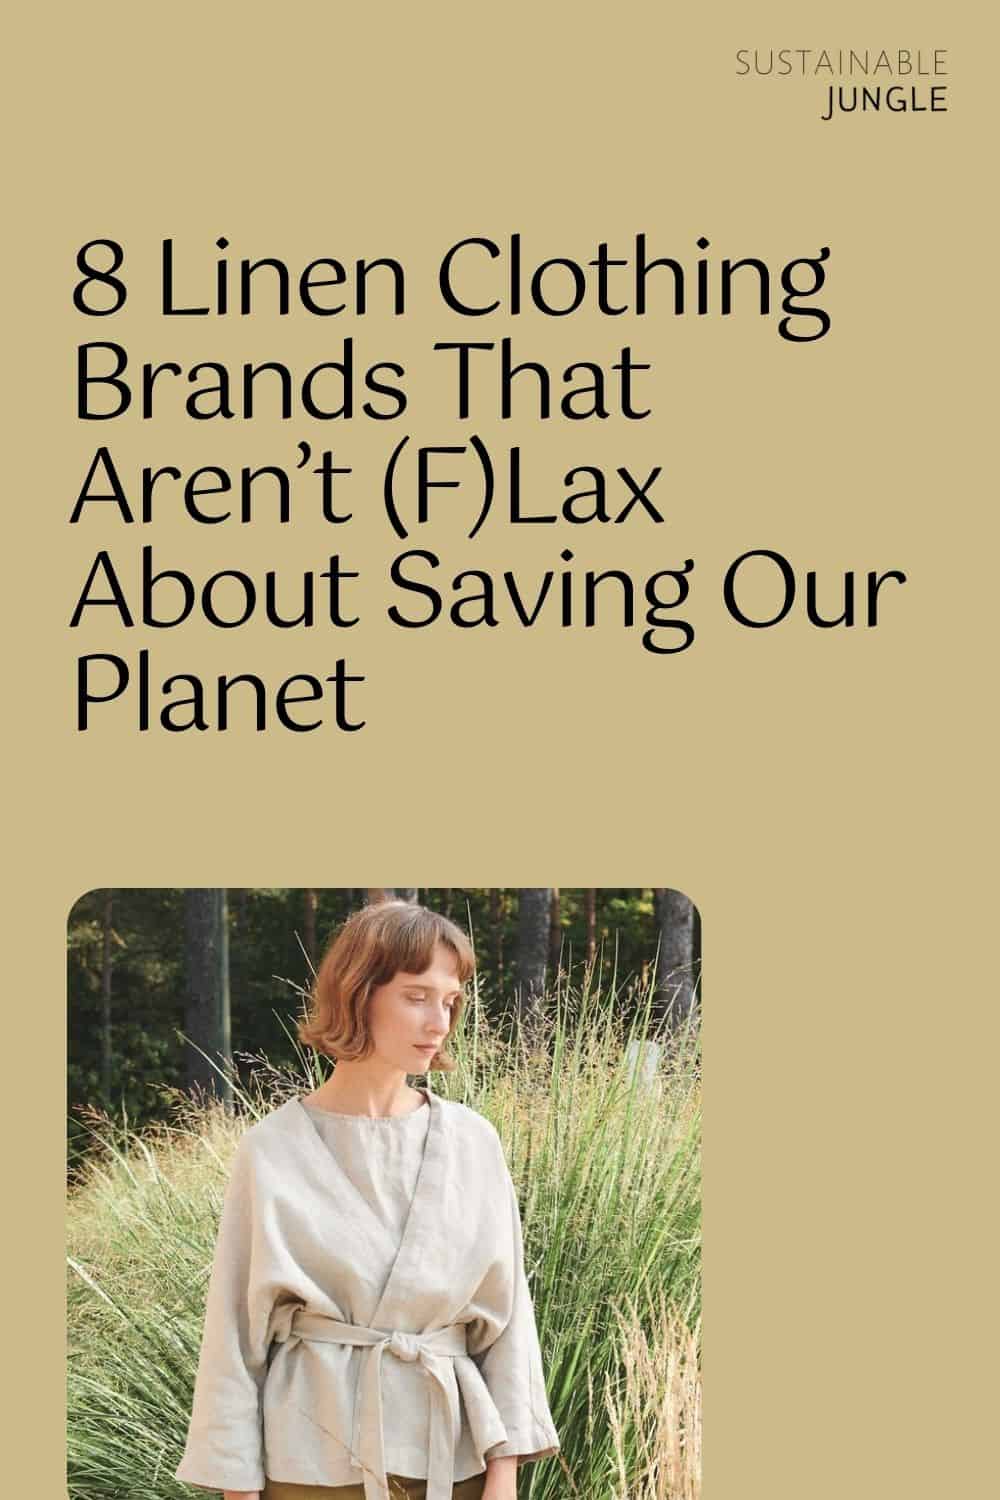 8 Linen Clothing Brands That Aren’t (F)Lax About Saving Our Planet Image by Linenfox #linenclothing #linenclothingbrands #flaxlinenclothing #flaxclothing #sustainablelinenclothing #bestlinenclothingbrands #sustainablejungle